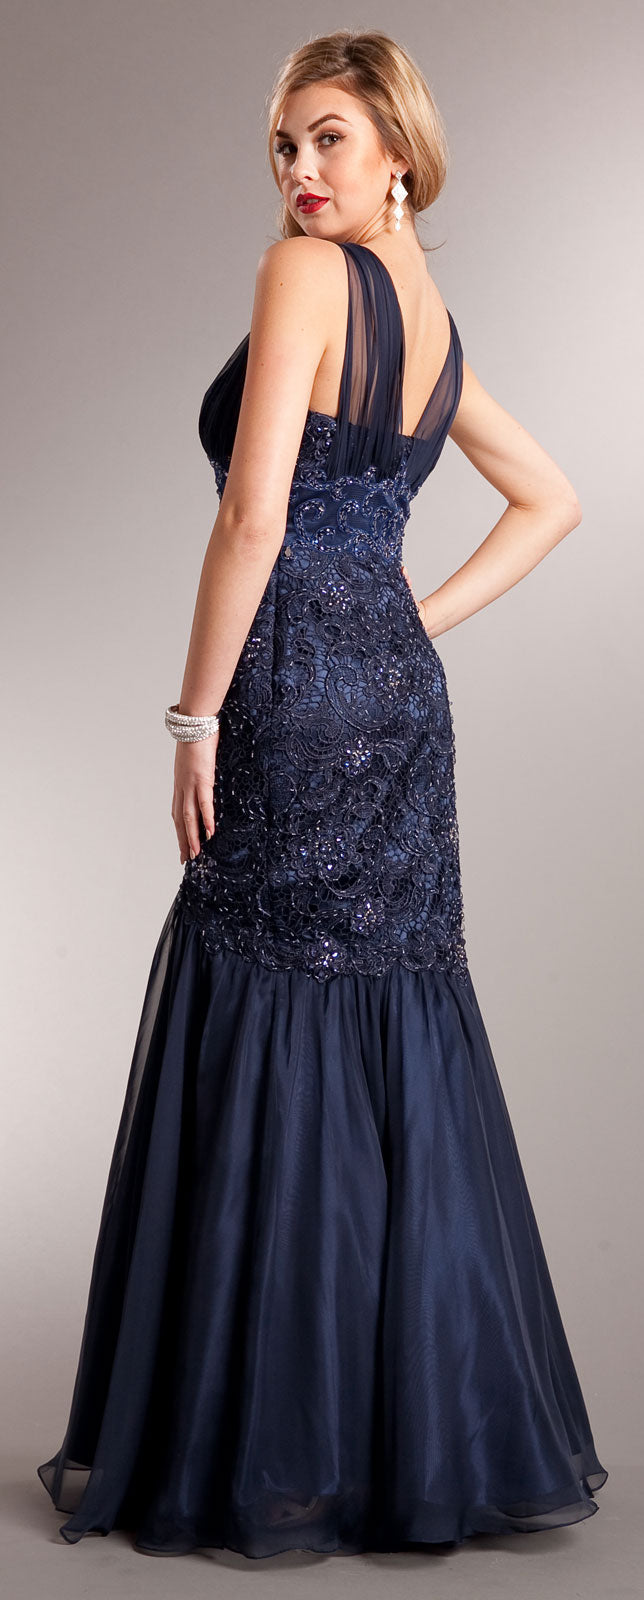 Image of Bejeweled Lace Bodice Mermaid Skirt Long Formal Prom Gown back in Navy